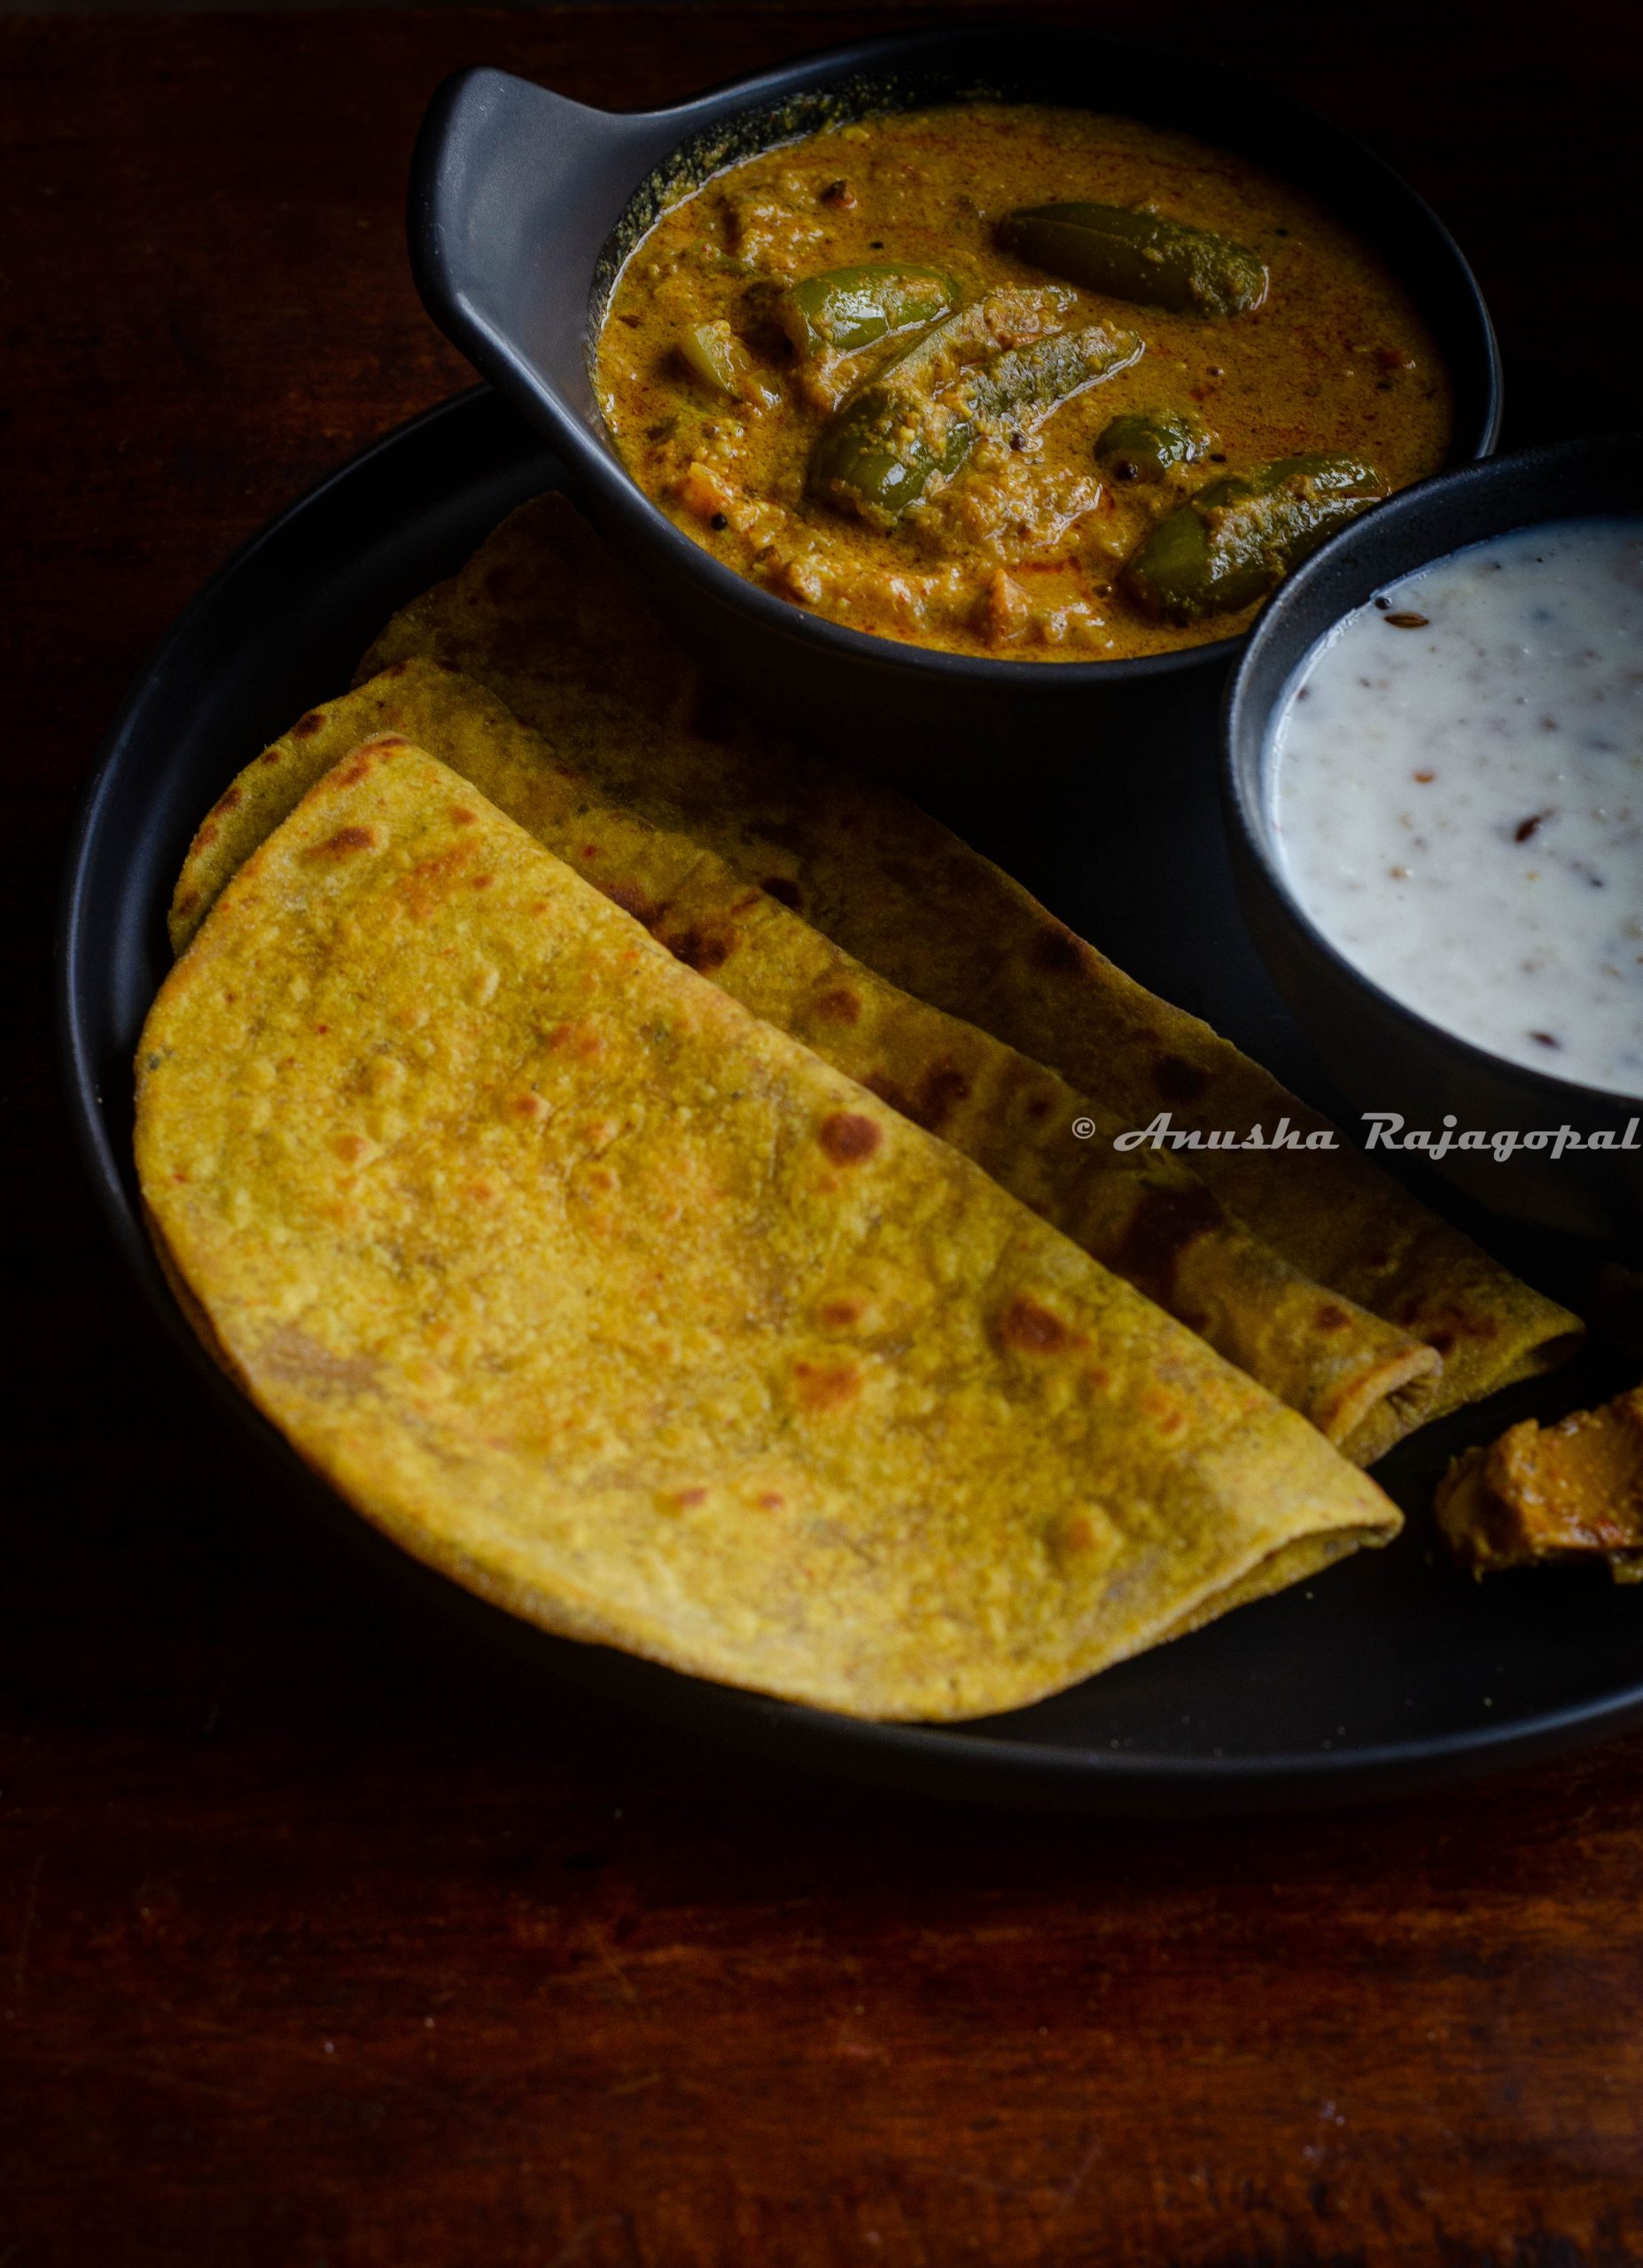 avocado parathas served on a black plate with yogurt and millet in a bowl by the side.